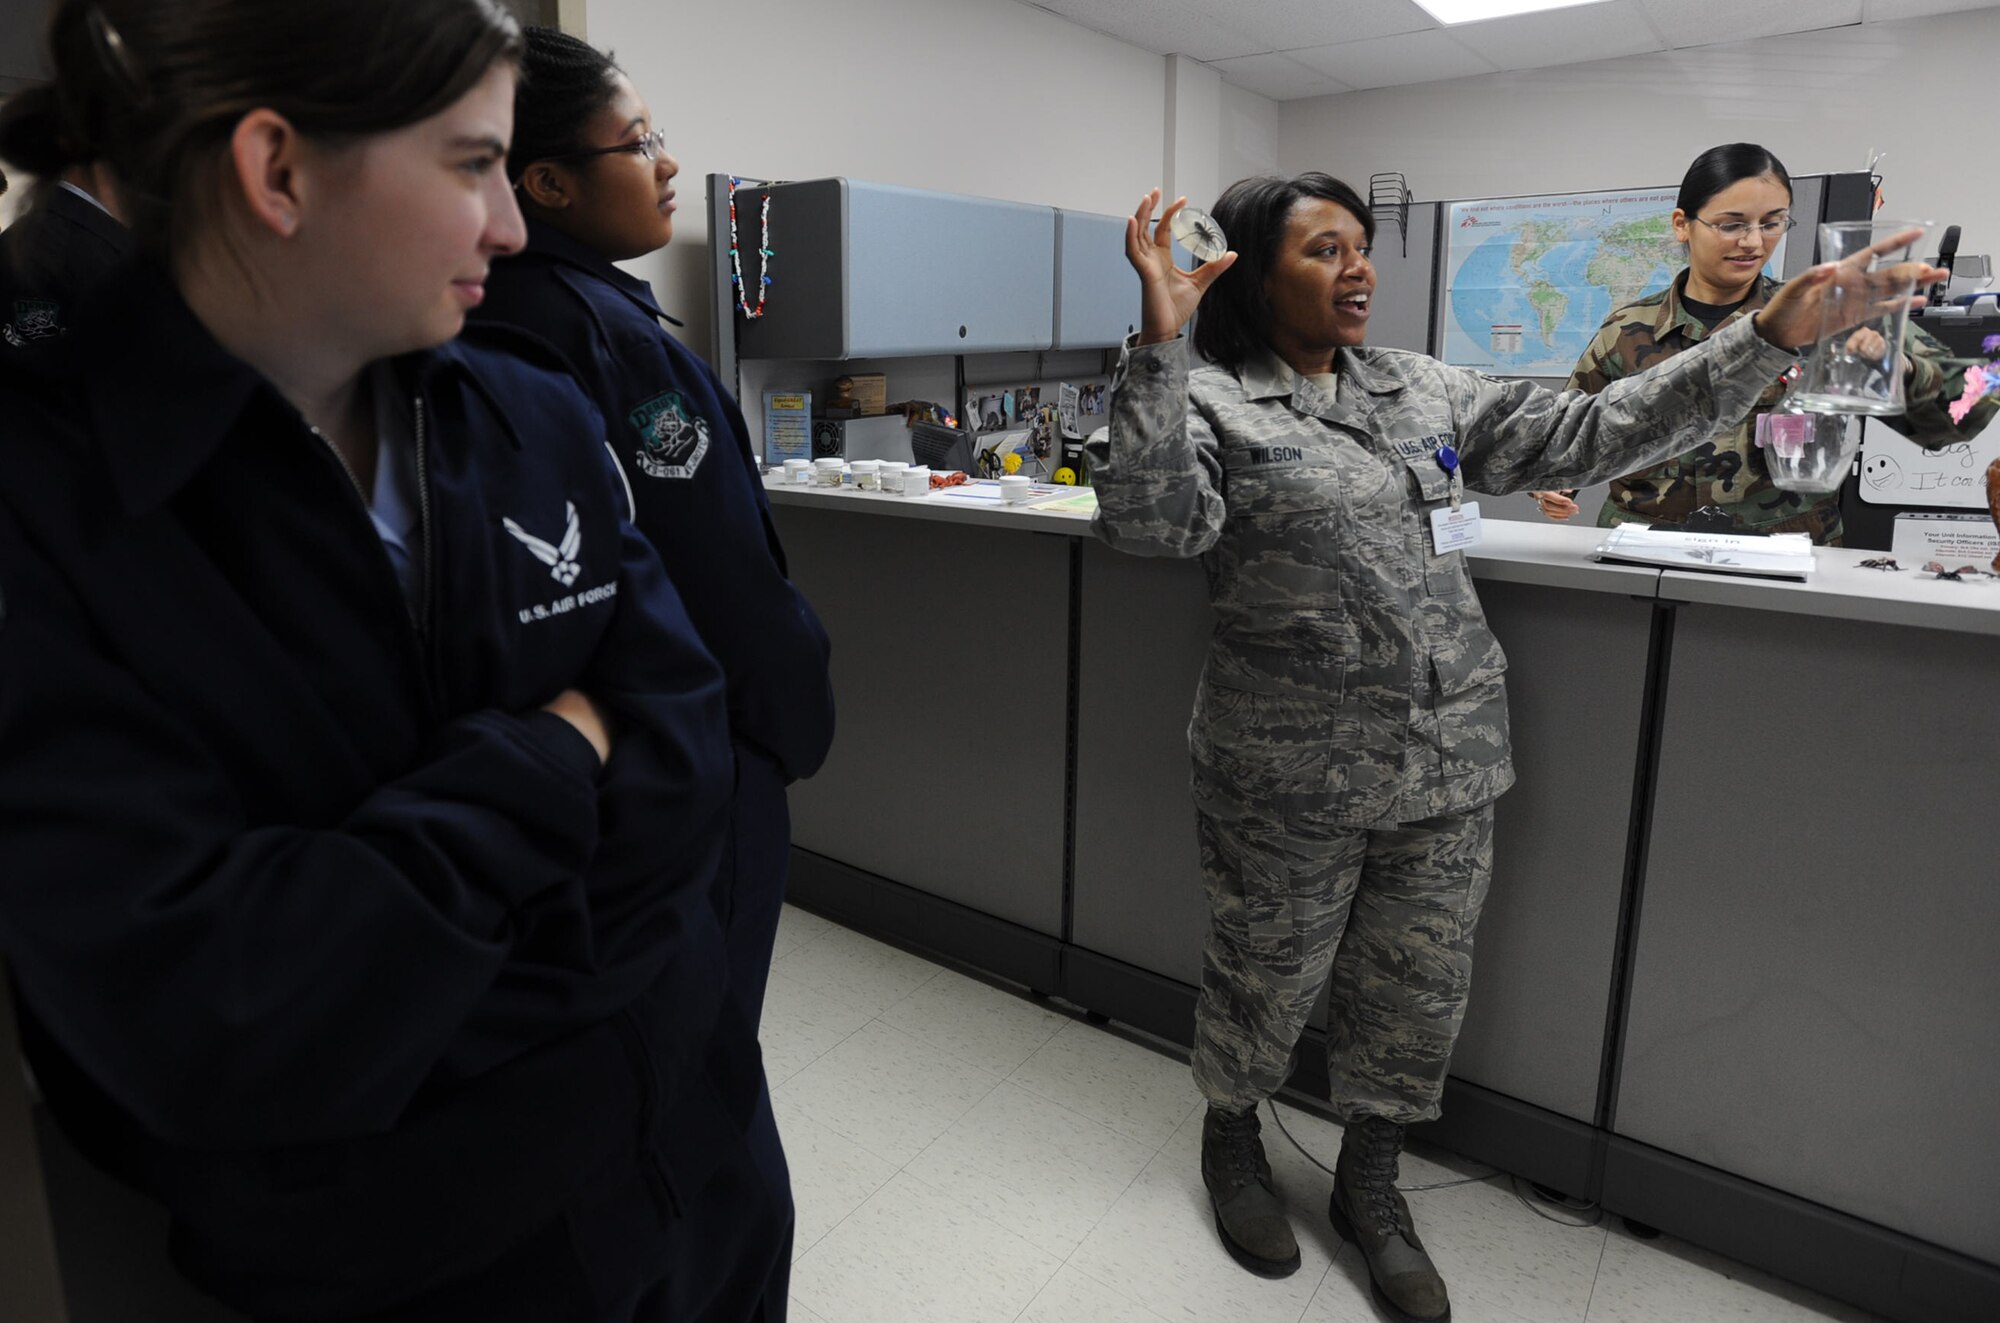 Senior Airman Tamara Wilson talks to Air Force Junior Reserve Officer Training Corps cadets about spiders and other critters monitored by the public health office at McConnell Air Force Base, Kan. The Derby High School cadets visited the base on Oct. 30 and were welcomed by Airmen from the 931st Air Refueling Group and the 22nd Air Refueling Wing. Airman Wilson is a Reserve public health technician assigned to the 931st Aerospace Medicine Flight. Airman 1st Class Susan Mitchell (also pictured) was one of several 22nd Airmen who helped Wison's presentation. The 931st is an associate Air Force Reserve Command unit and the 22nd is its active-duty host at McConnell. (U.S. Air Force photo/Tech. Sgt. Jason Schaap)